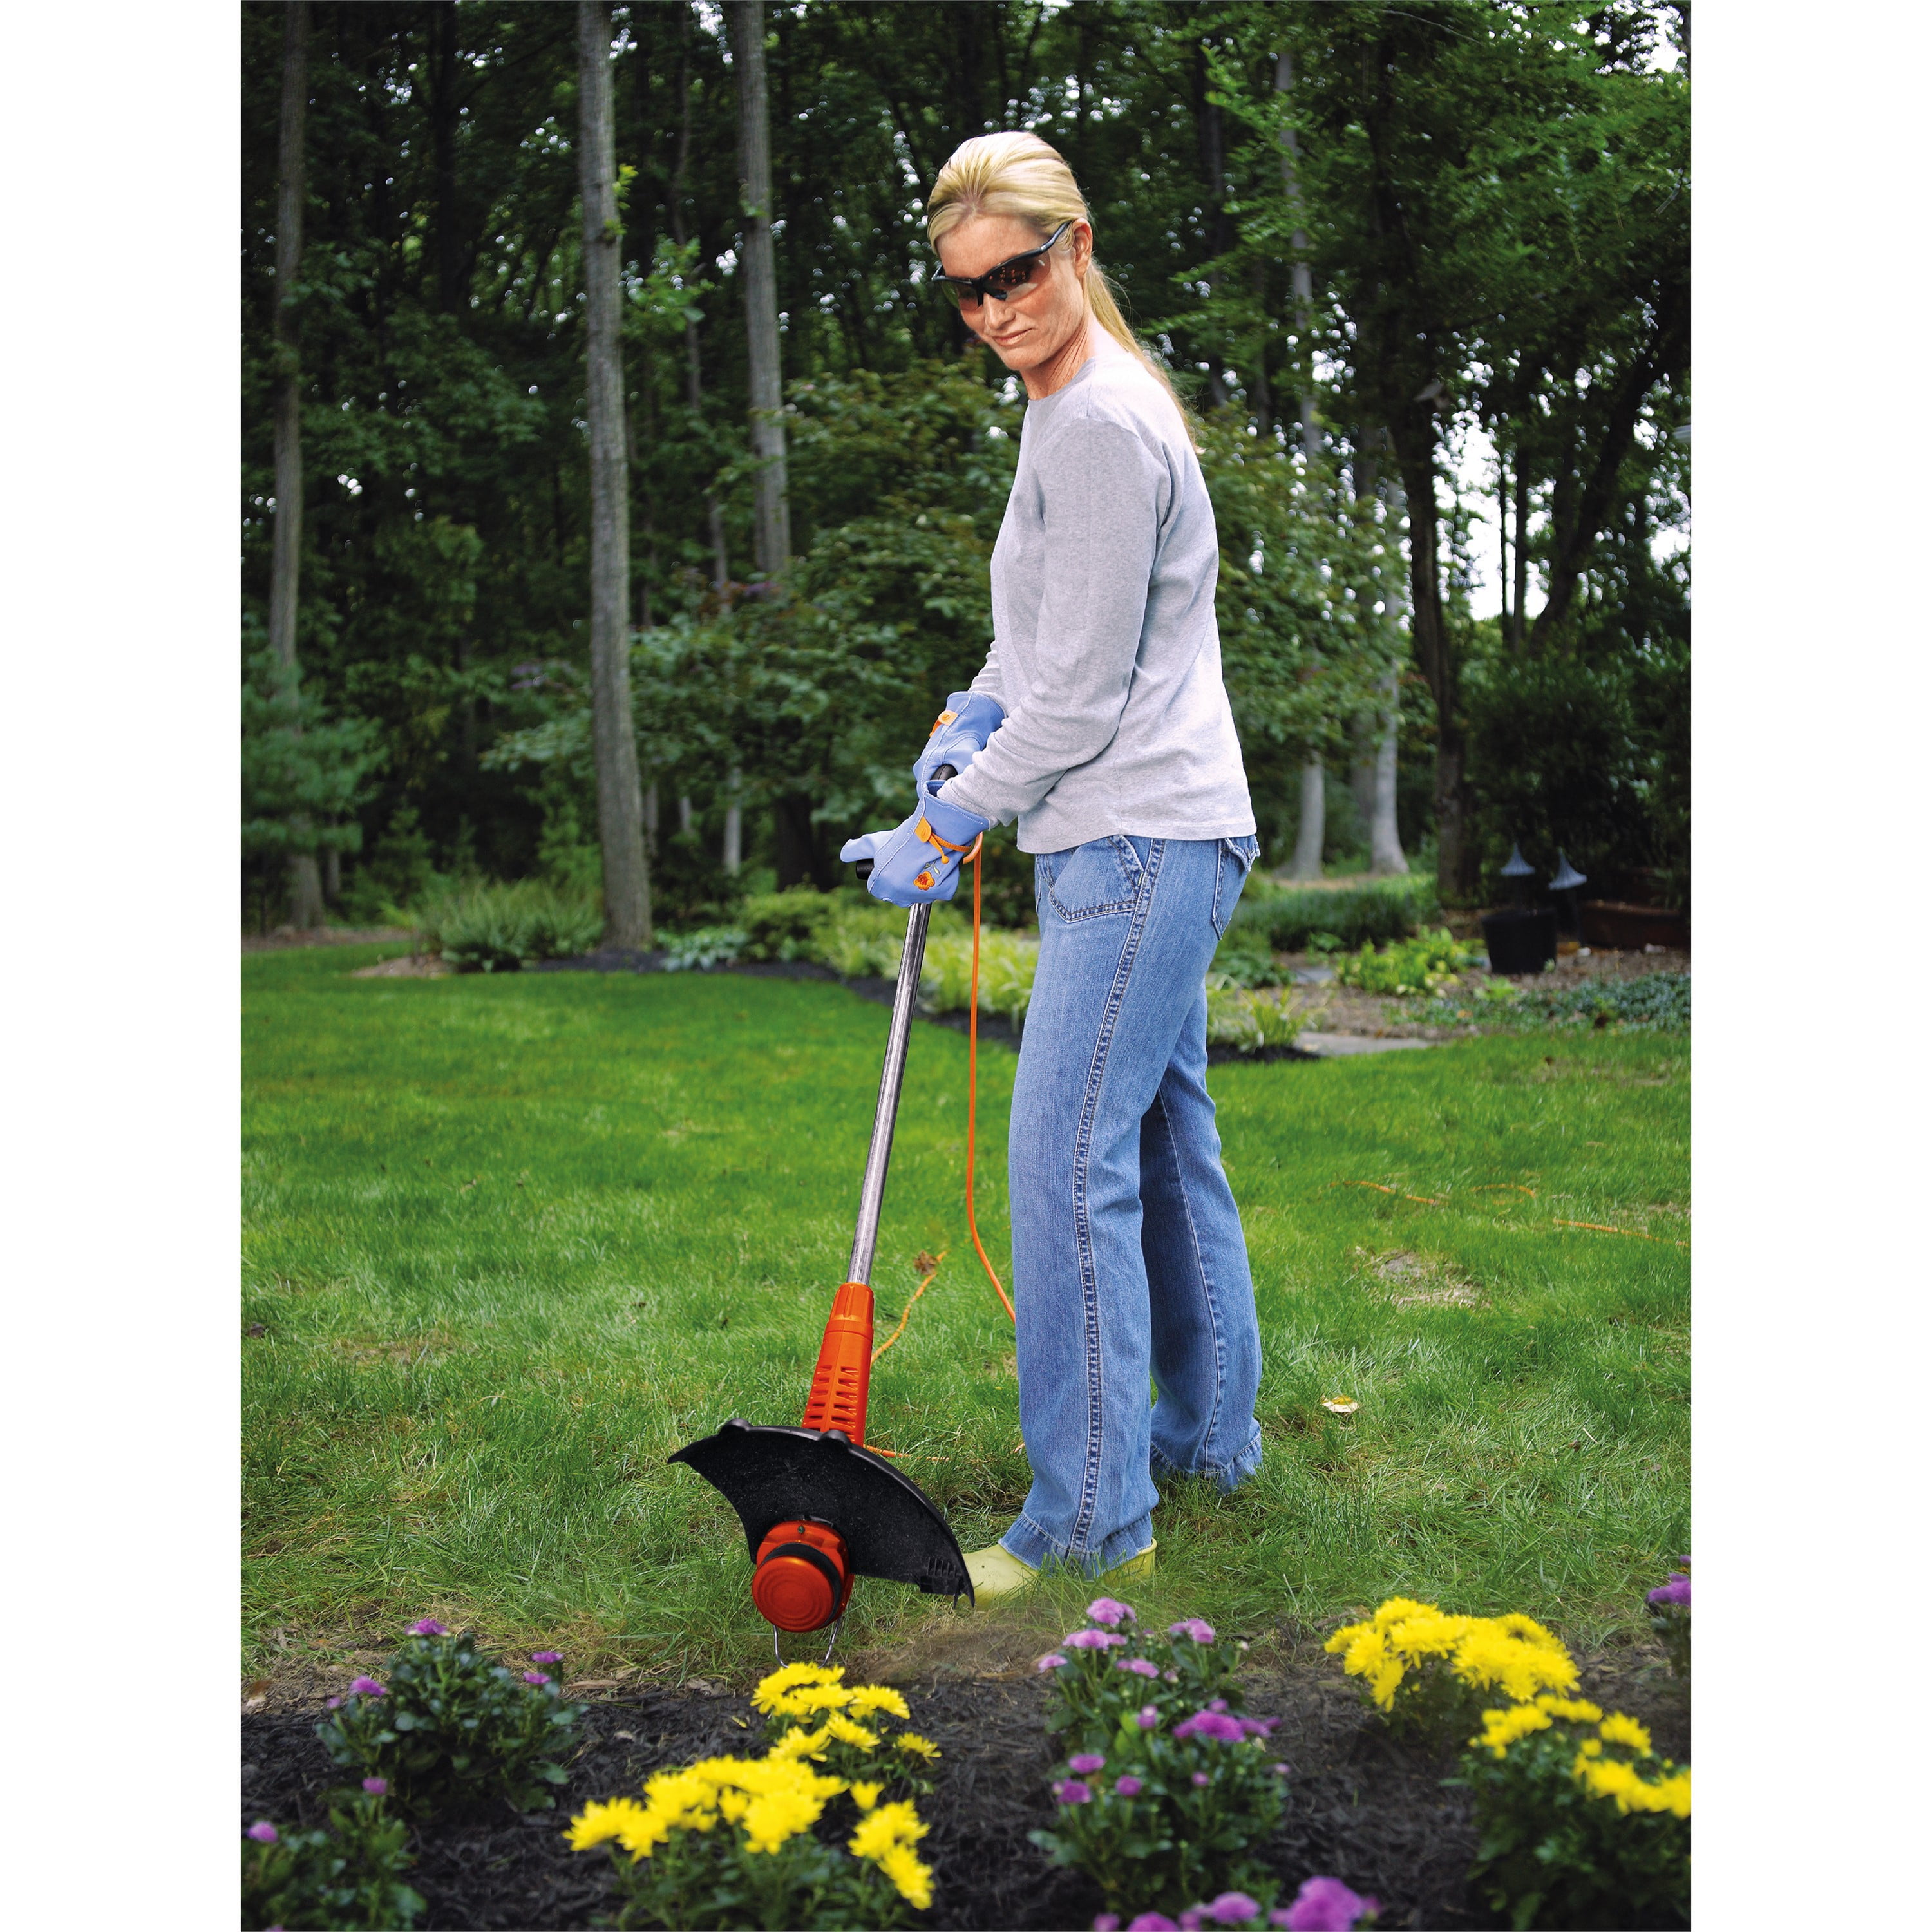 BLACK+DECKER String Trimmer, Electric Automatic Feed, 13-Inch, 4.4-Amp ( ST7700)